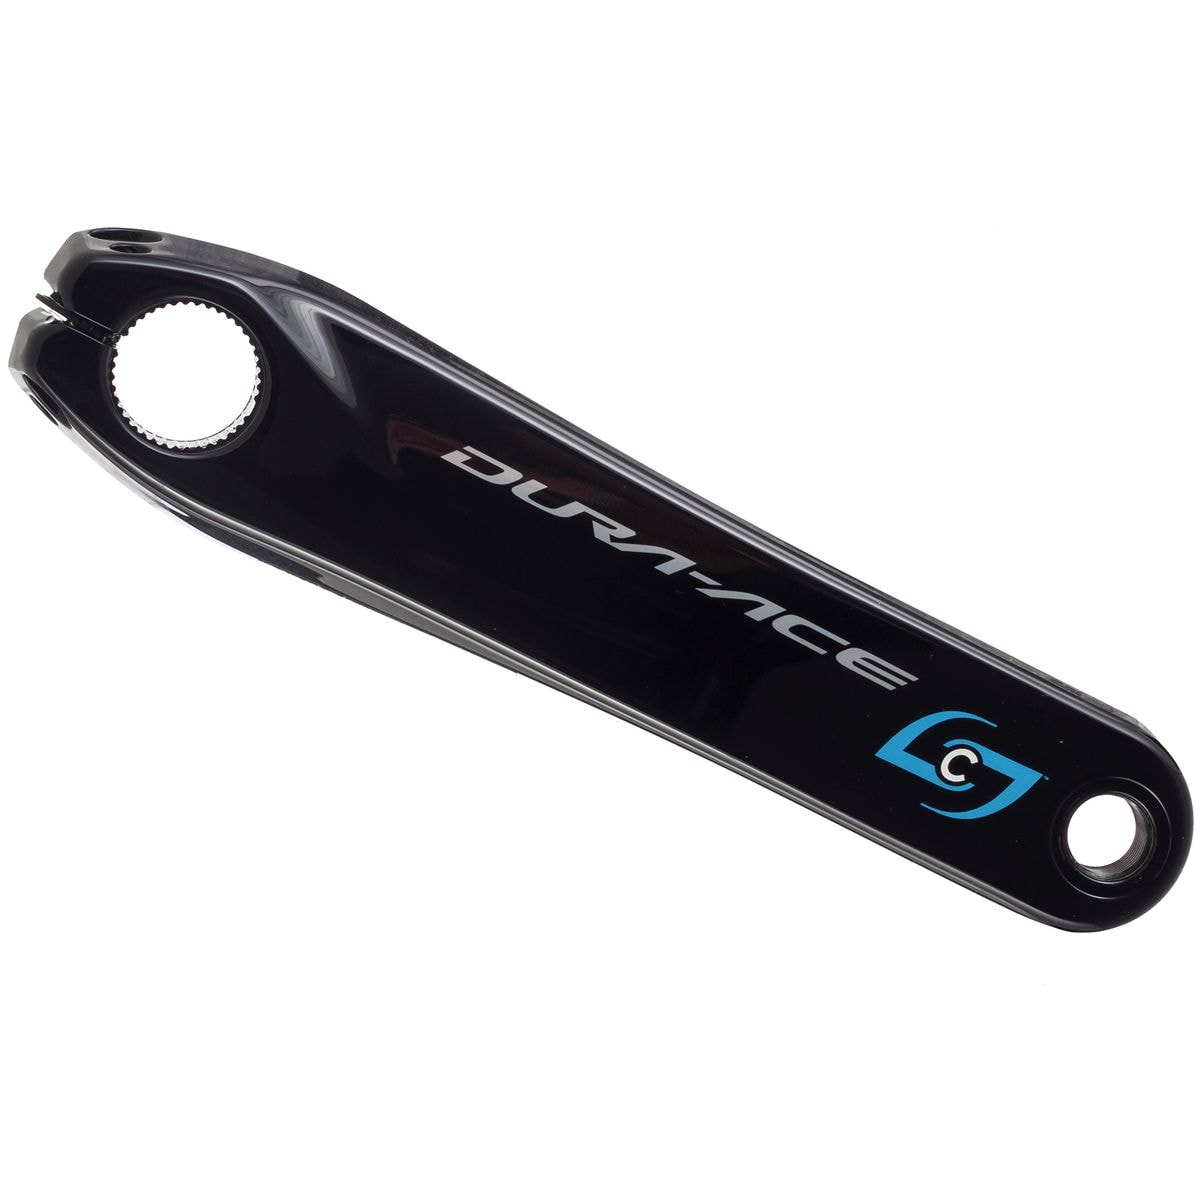 Stages Cycling Shimano Dura-Ace R9100 Single Leg Power Meter Crank Arm